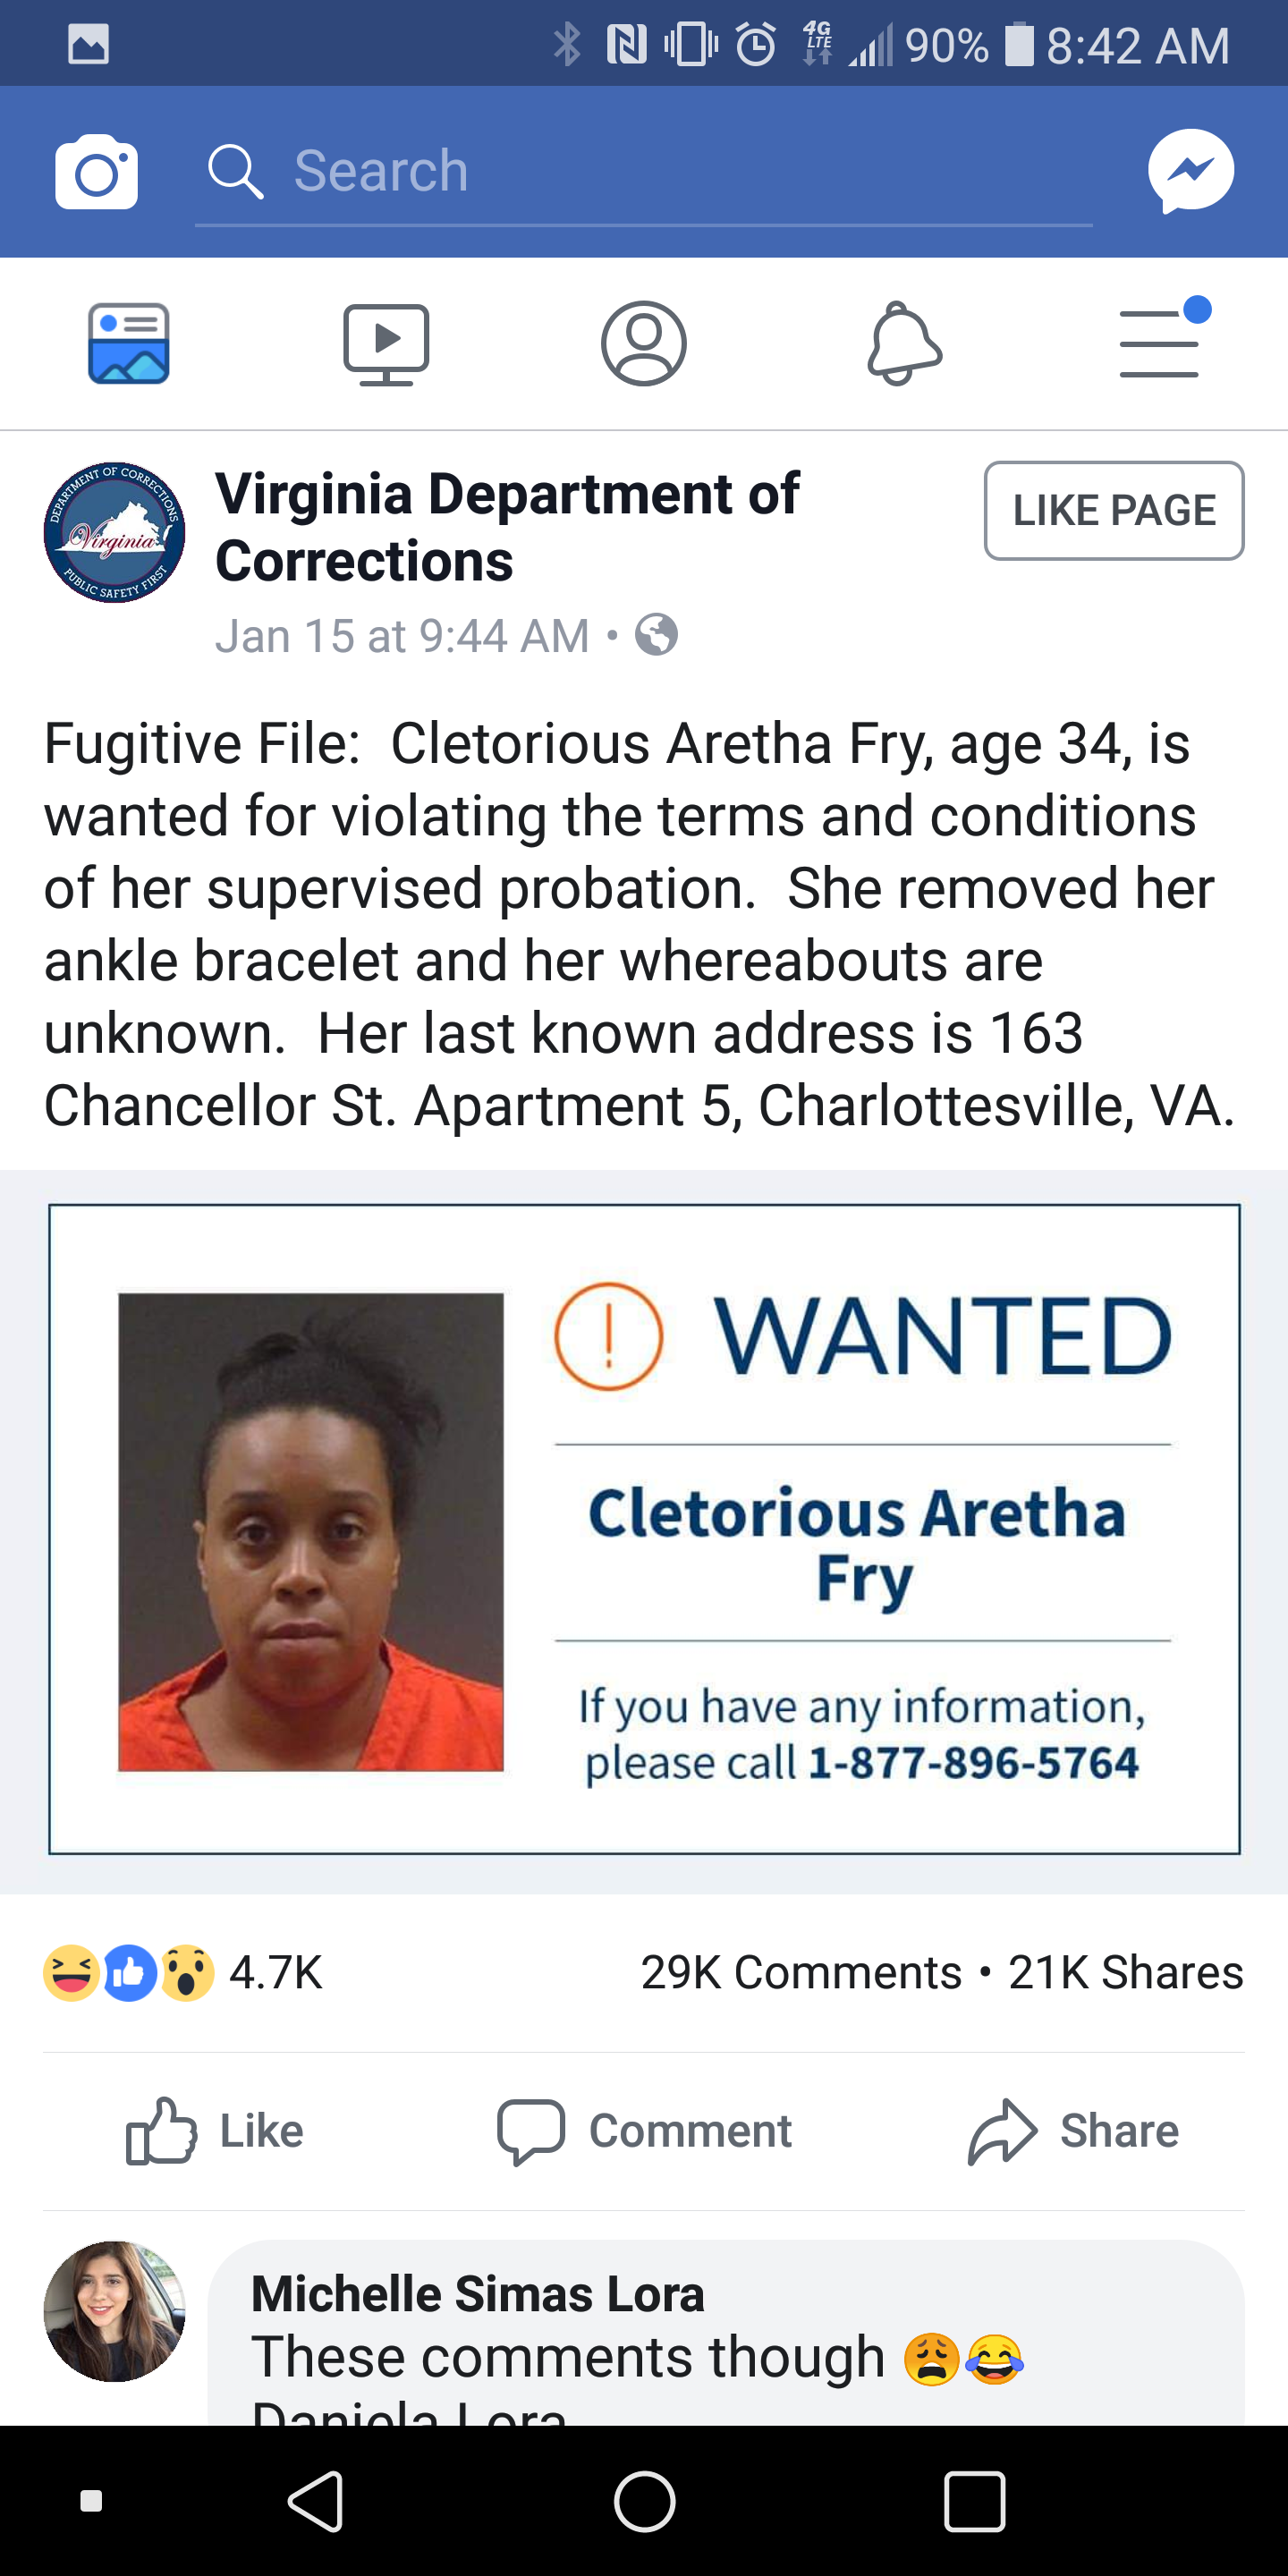 web page - Do 90%. O Q Search Virginia Department of Page Corrections Jan 15. at 944 Am Fugitive File Cletorious Aretha Fry, age 34, is wanted for violating the terms and conditions of her supervised probation. She removed her ankle bracelet and her where